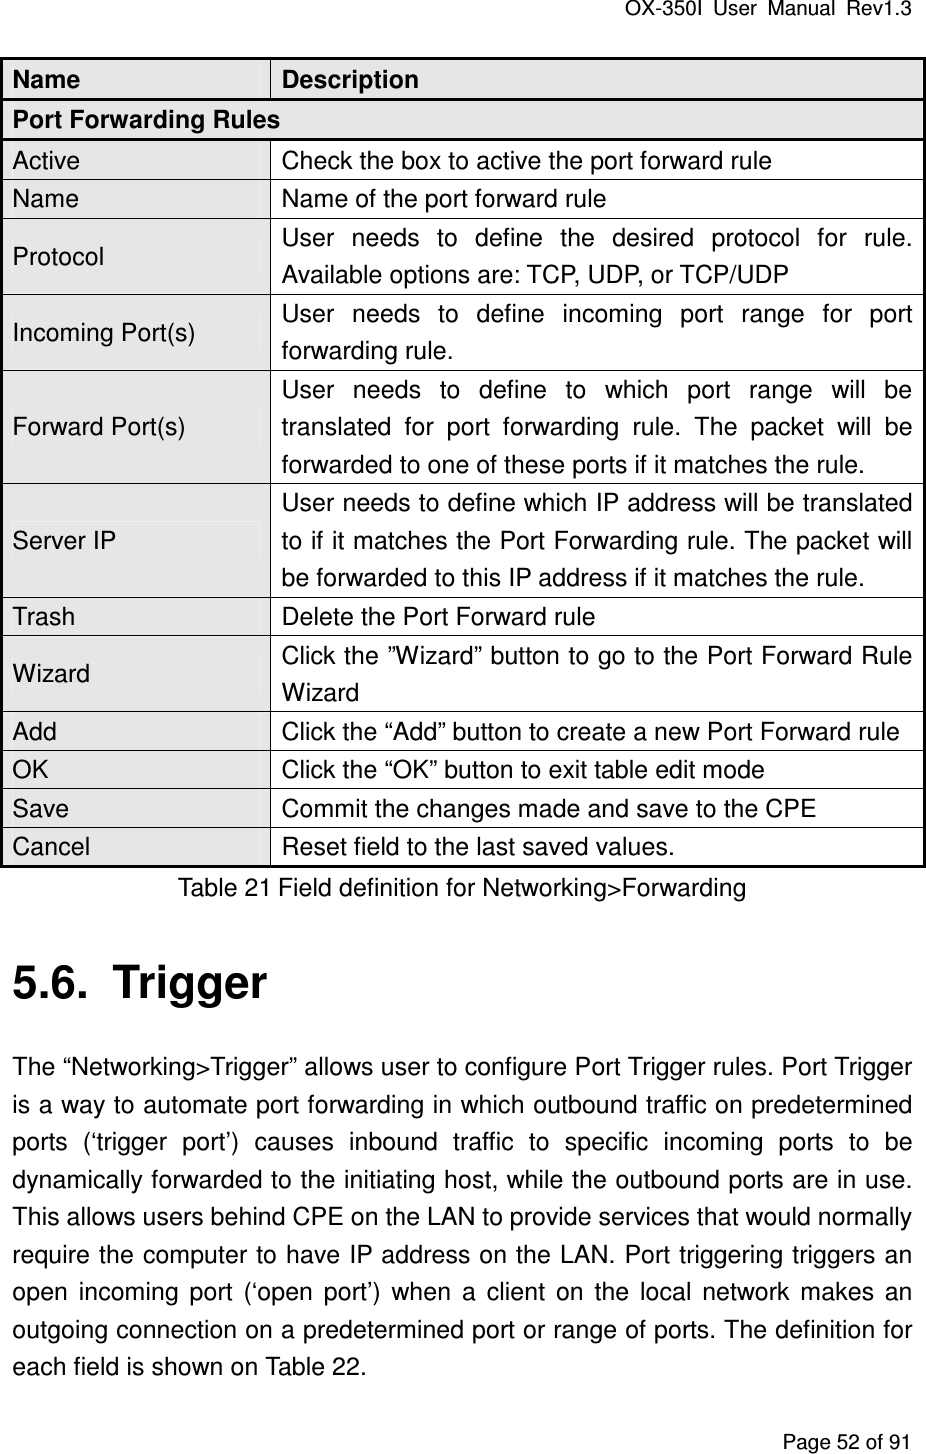 OX-350I  User  Manual  Rev1.3 Page 52 of 91 Name  Description Port Forwarding Rules Active  Check the box to active the port forward rule Name  Name of the port forward rule Protocol  User  needs  to  define  the  desired  protocol  for  rule. Available options are: TCP, UDP, or TCP/UDP Incoming Port(s)  User  needs  to  define  incoming  port  range  for  port forwarding rule. Forward Port(s) User  needs  to  define  to  which  port  range  will  be translated  for  port  forwarding  rule.  The  packet  will  be forwarded to one of these ports if it matches the rule. Server IP User needs to define which IP address will be translated to if it matches the Port Forwarding rule. The packet will be forwarded to this IP address if it matches the rule. Trash  Delete the Port Forward rule Wizard  Click the ”Wizard” button to go to the Port Forward Rule Wizard Add  Click the “Add” button to create a new Port Forward rule OK  Click the “OK” button to exit table edit mode Save  Commit the changes made and save to the CPE Cancel  Reset field to the last saved values. Table 21 Field definition for Networking&gt;Forwarding 5.6.  Trigger The “Networking&gt;Trigger” allows user to configure Port Trigger rules. Port Trigger is a way to automate port forwarding in which outbound traffic on predetermined ports  (‘trigger  port’)  causes  inbound  traffic  to  specific  incoming  ports  to  be dynamically forwarded to the initiating host, while the outbound ports are in use. This allows users behind CPE on the LAN to provide services that would normally require the computer to have IP address on the LAN. Port triggering triggers an open  incoming  port  (‘open  port’)  when  a  client  on  the  local  network  makes  an outgoing connection on a predetermined port or range of ports. The definition for each field is shown on Table 22. 